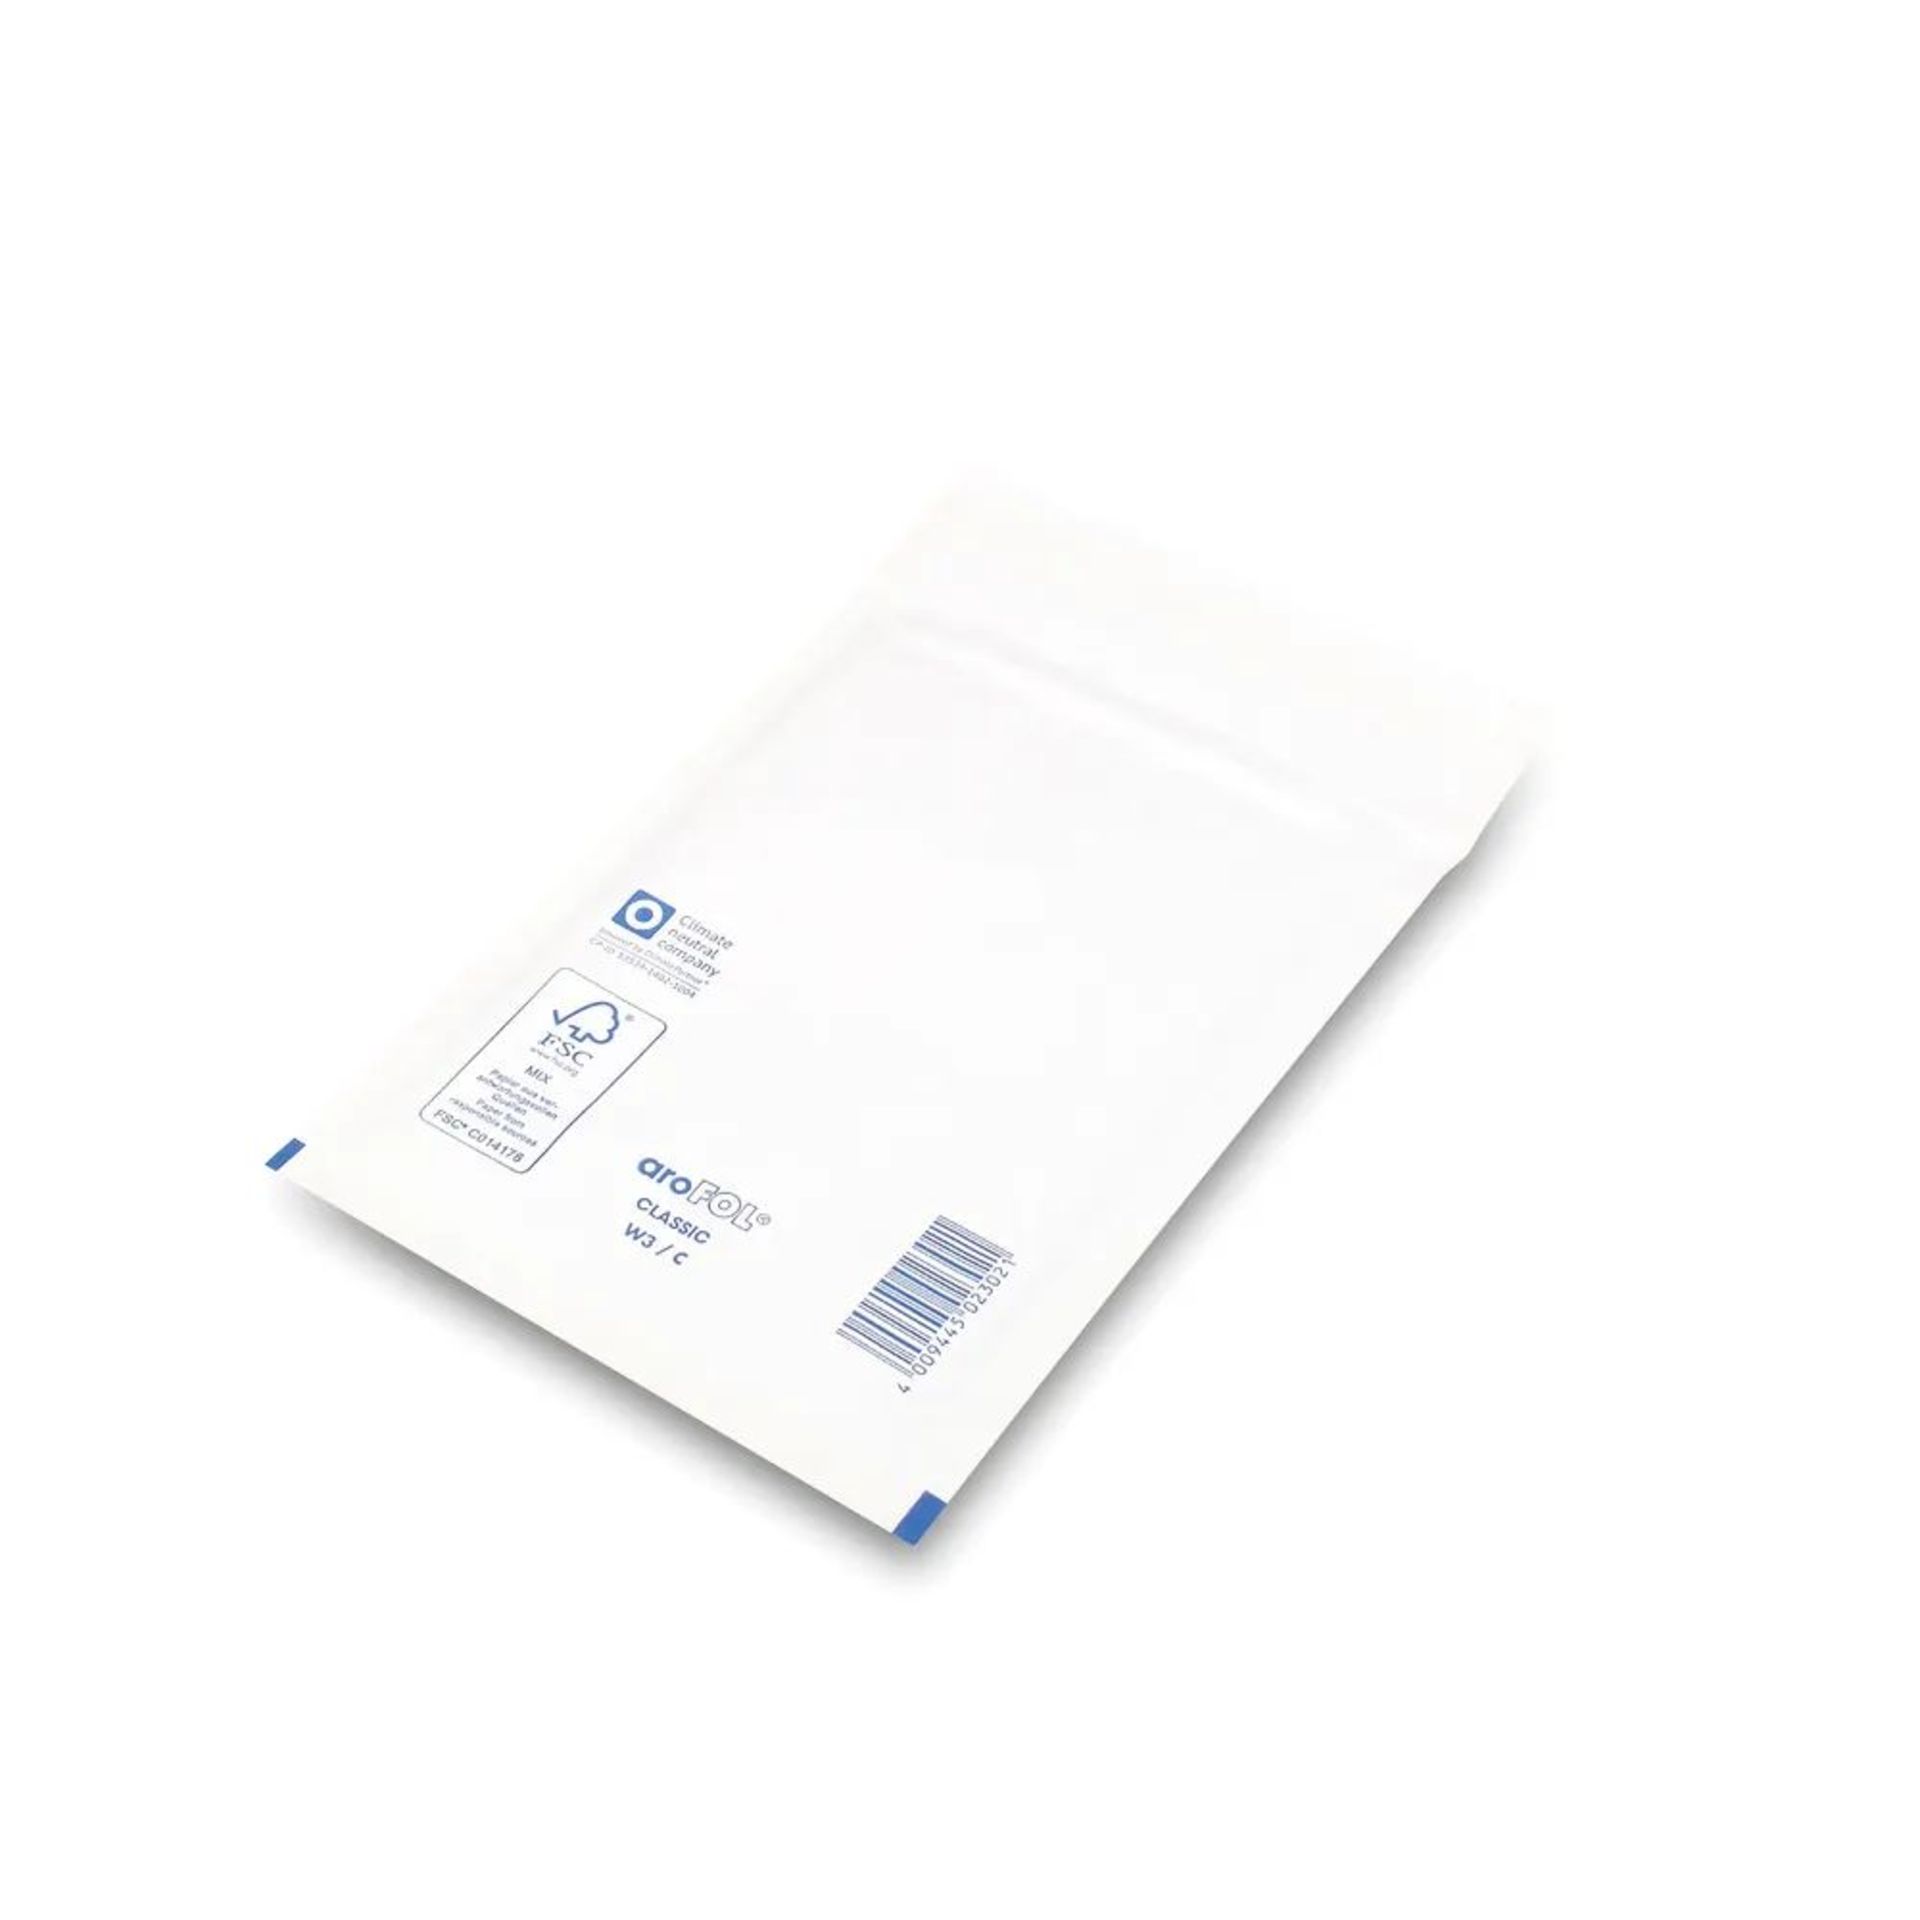 750 X BRAND NEW BUBBLE LINED ENVELOPES IN VARIOUS SIZES R10-7